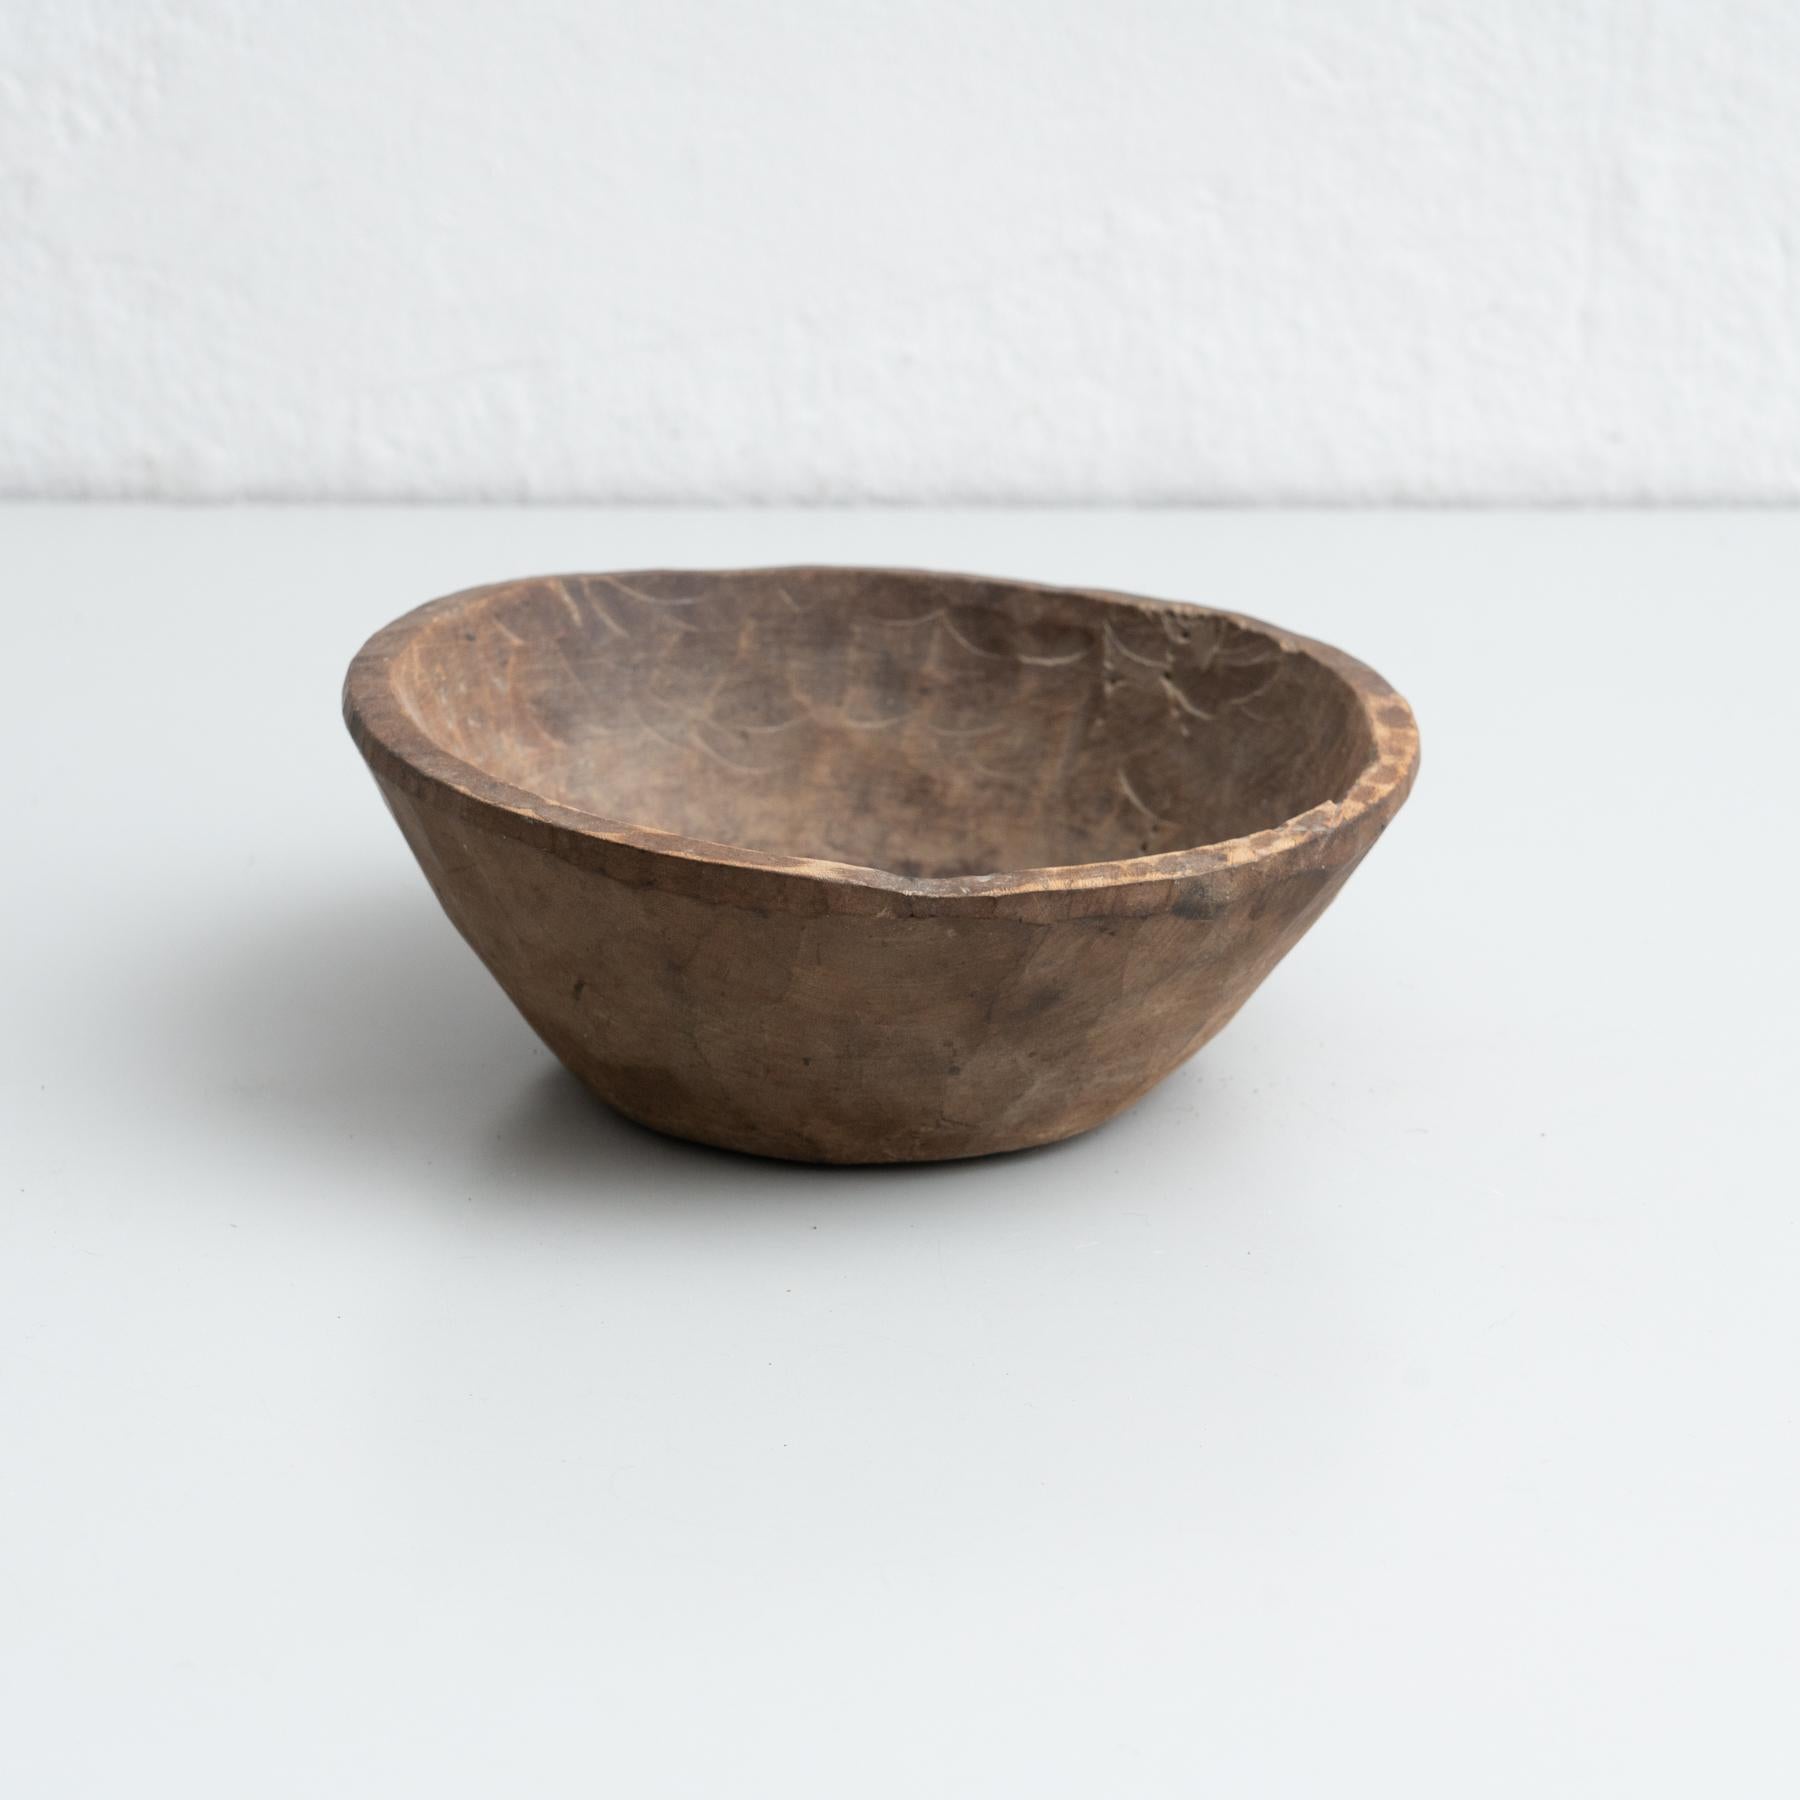 Handmade primitive bowl manufactured by unknown designer circa 1960.

Made of wood in the Catalan Pyrenees.

In good original condition with minor wear consistent with age and use, preserving a beautiful patina.



